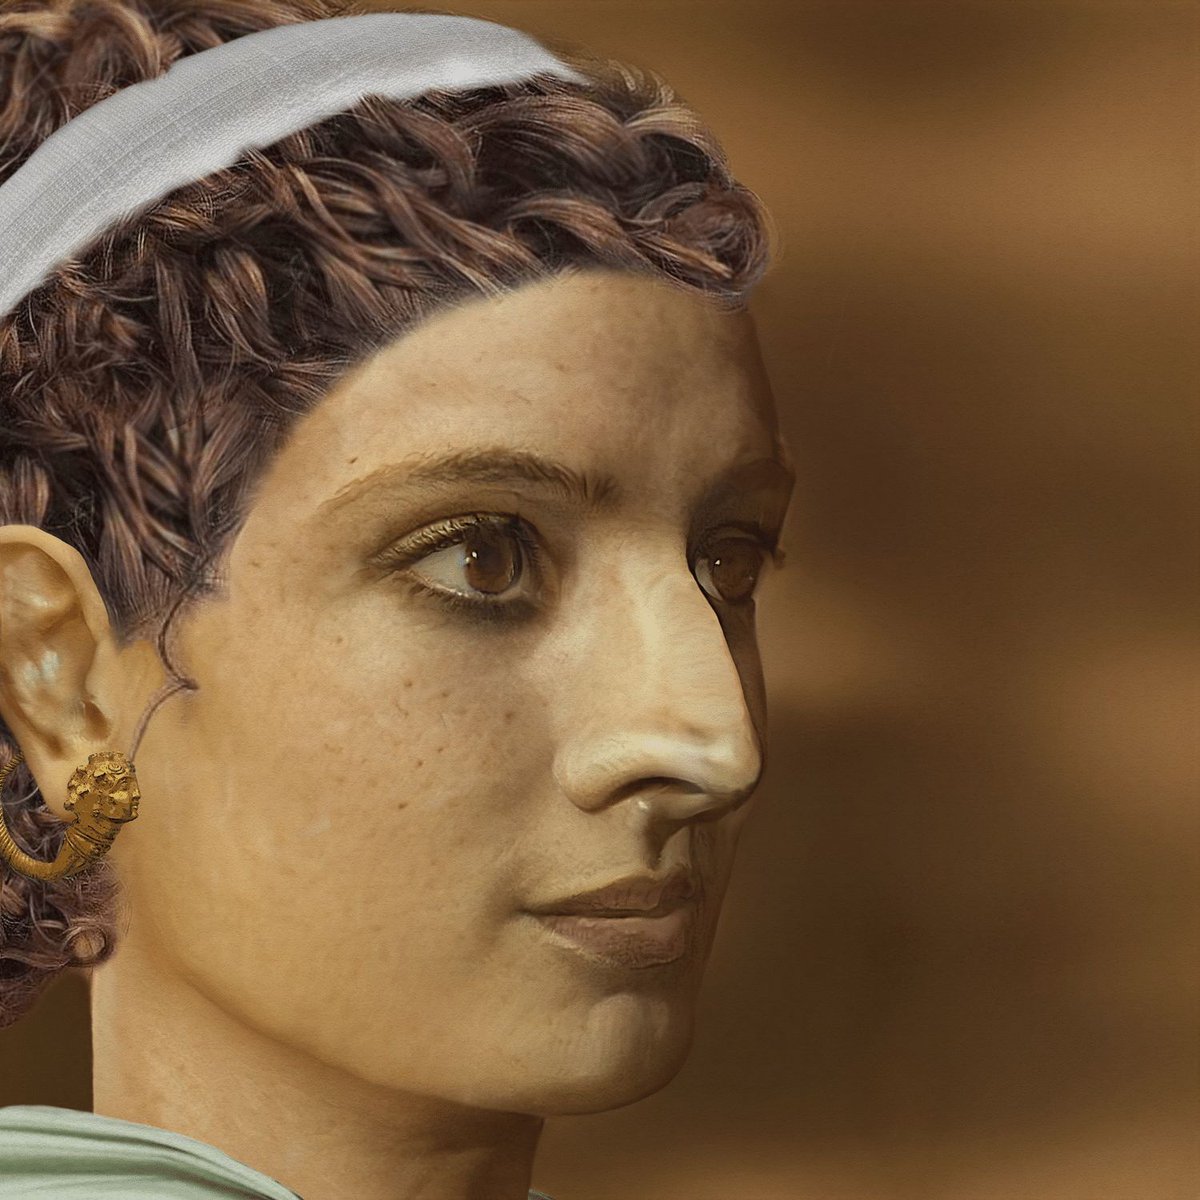 Facial reconstruction of the Ptolemaic Egyptian queen Cleopatra VII (r. 51-30 BCE). #History #CleopatraVII